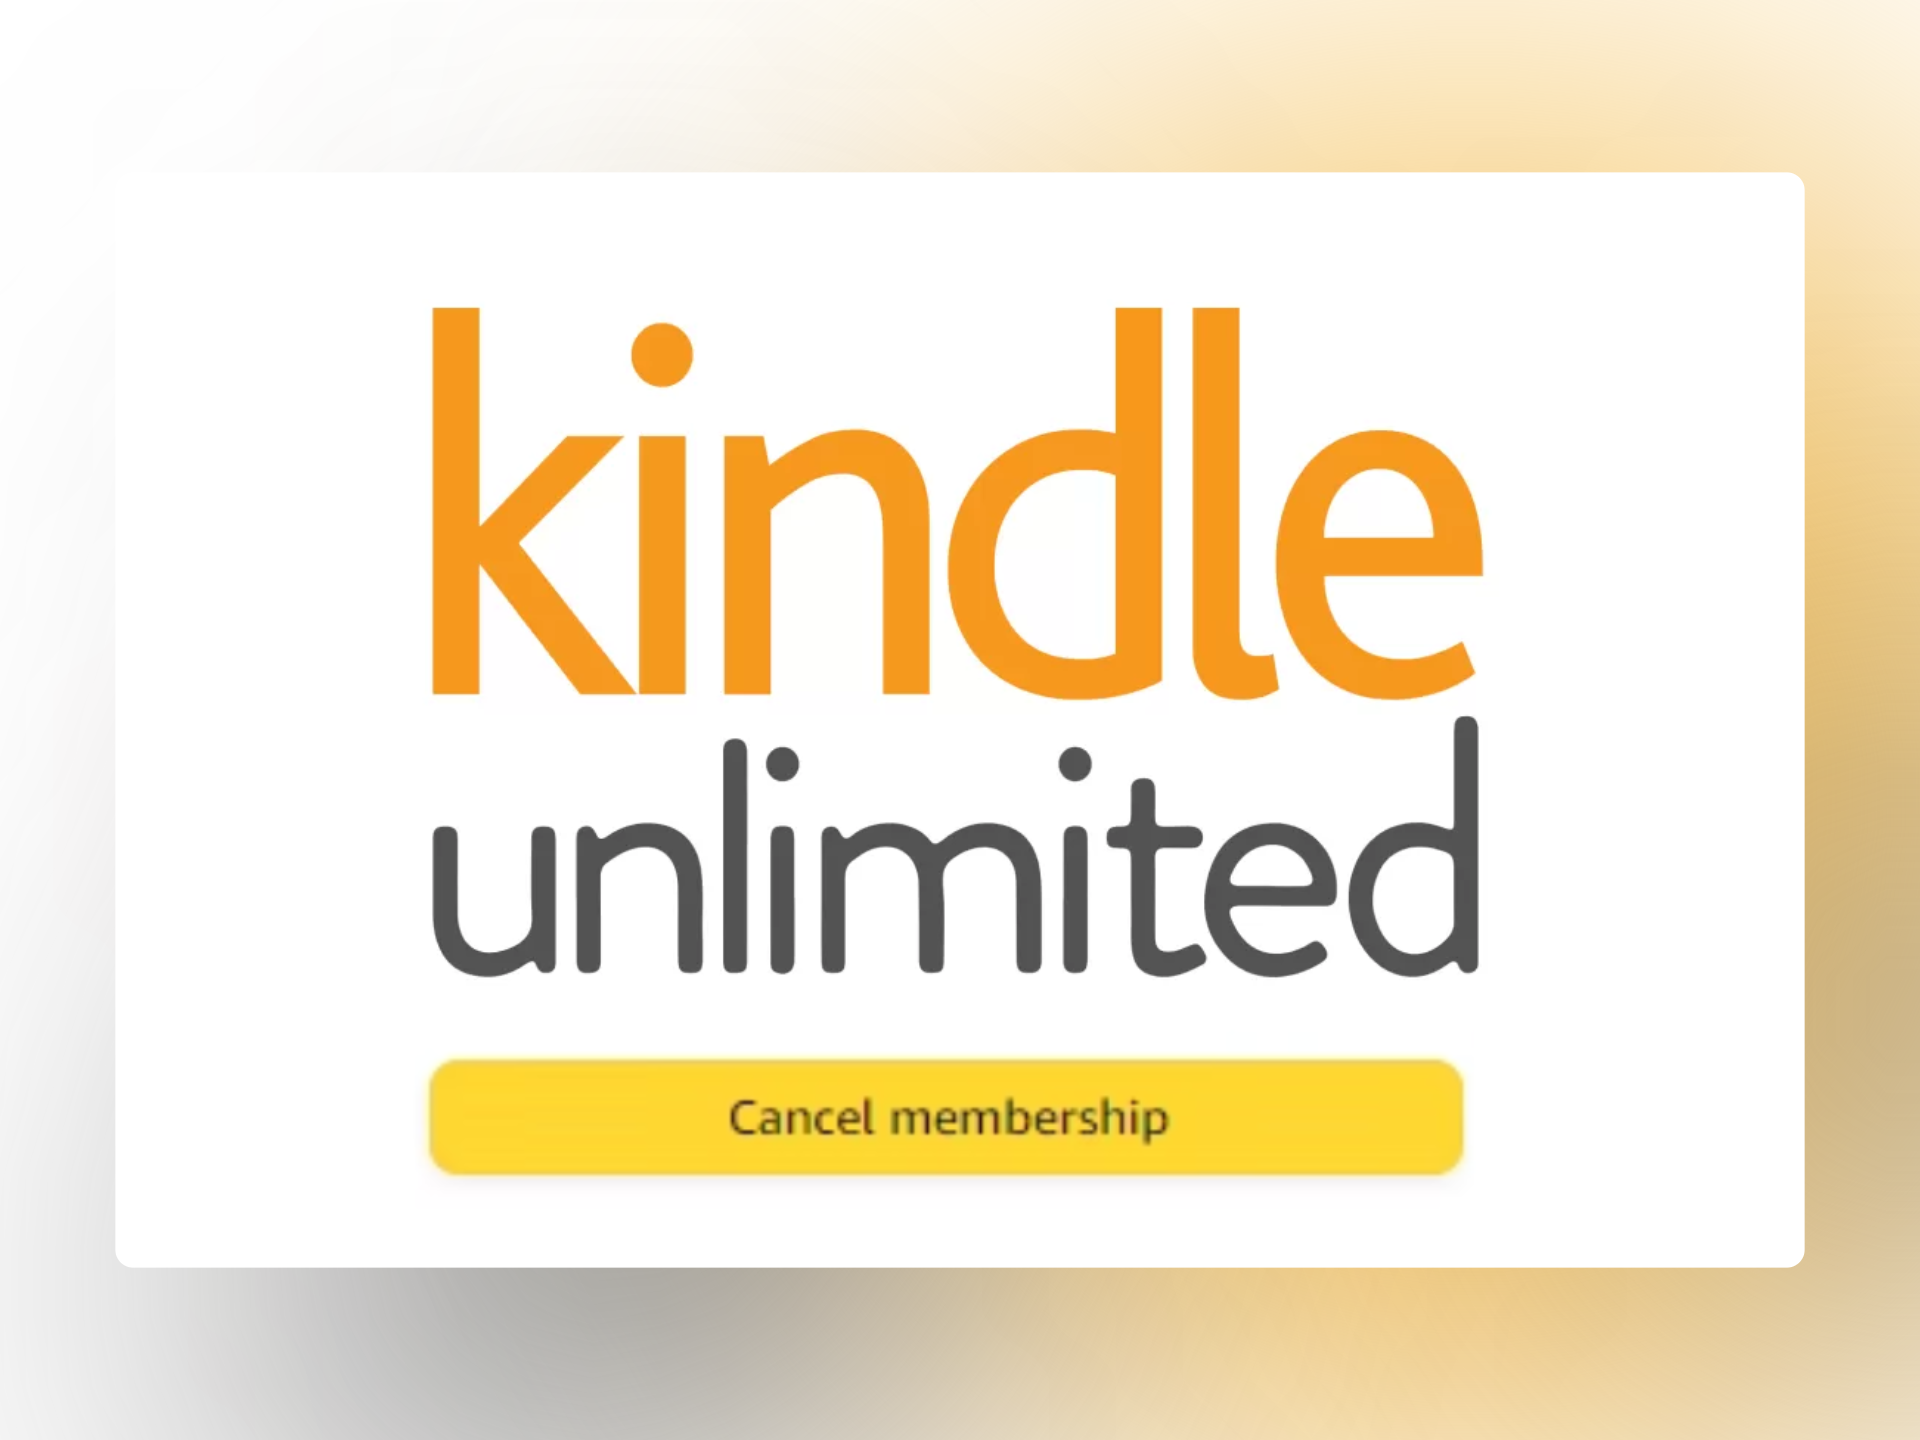 Cancel Kindle Unlimited